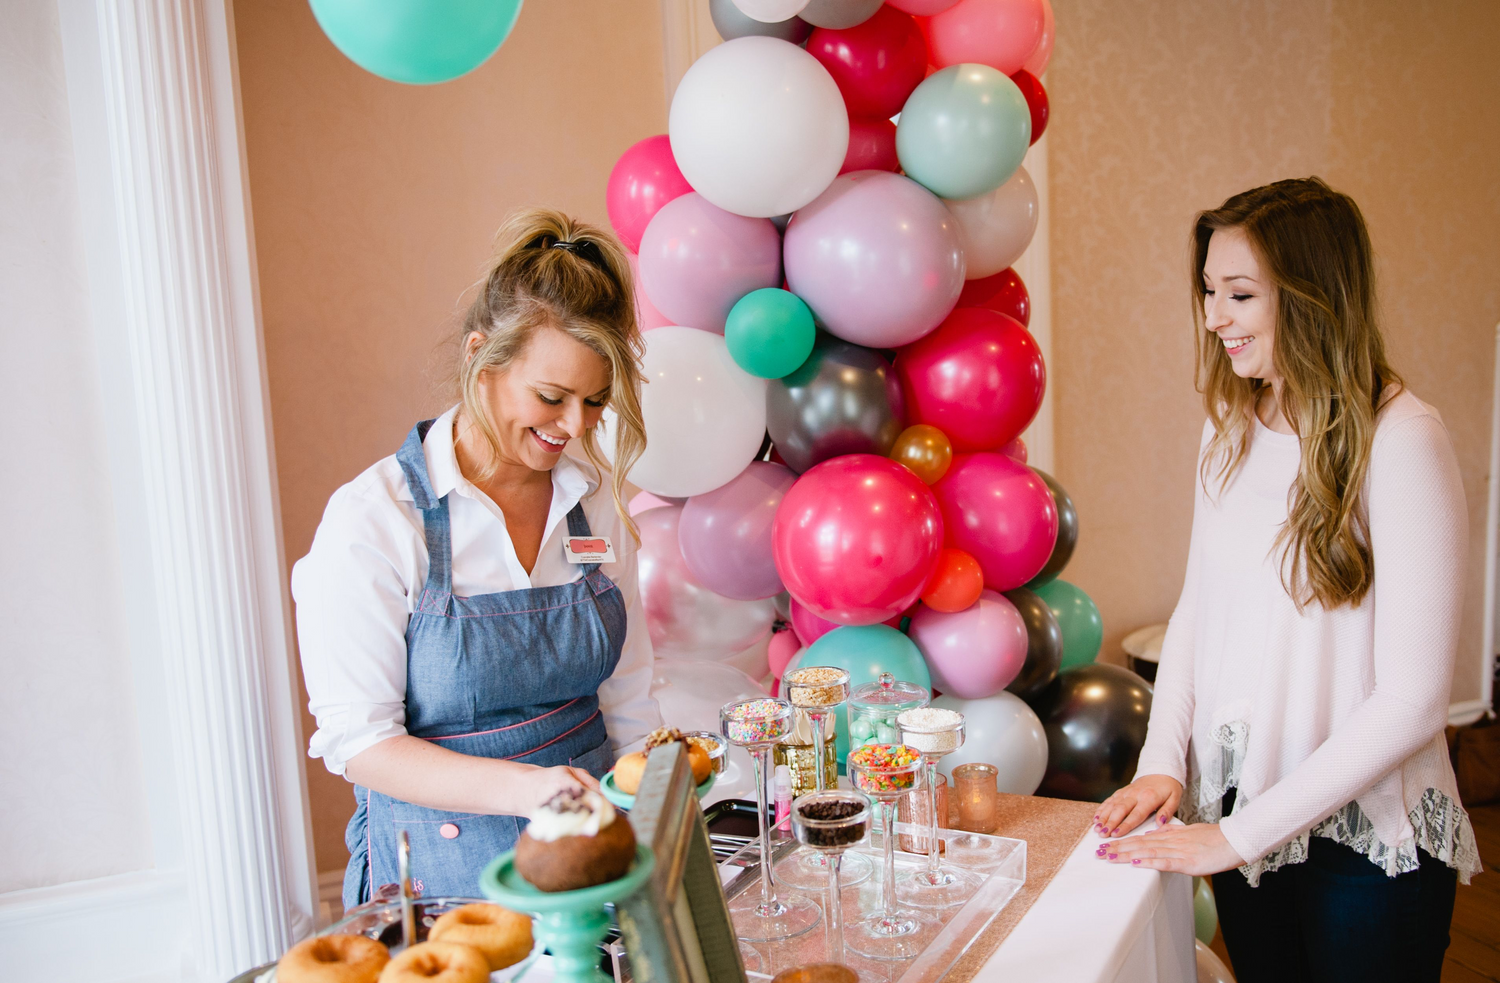 Woman serves custom donut to guest at a wedding in Austin, Texas